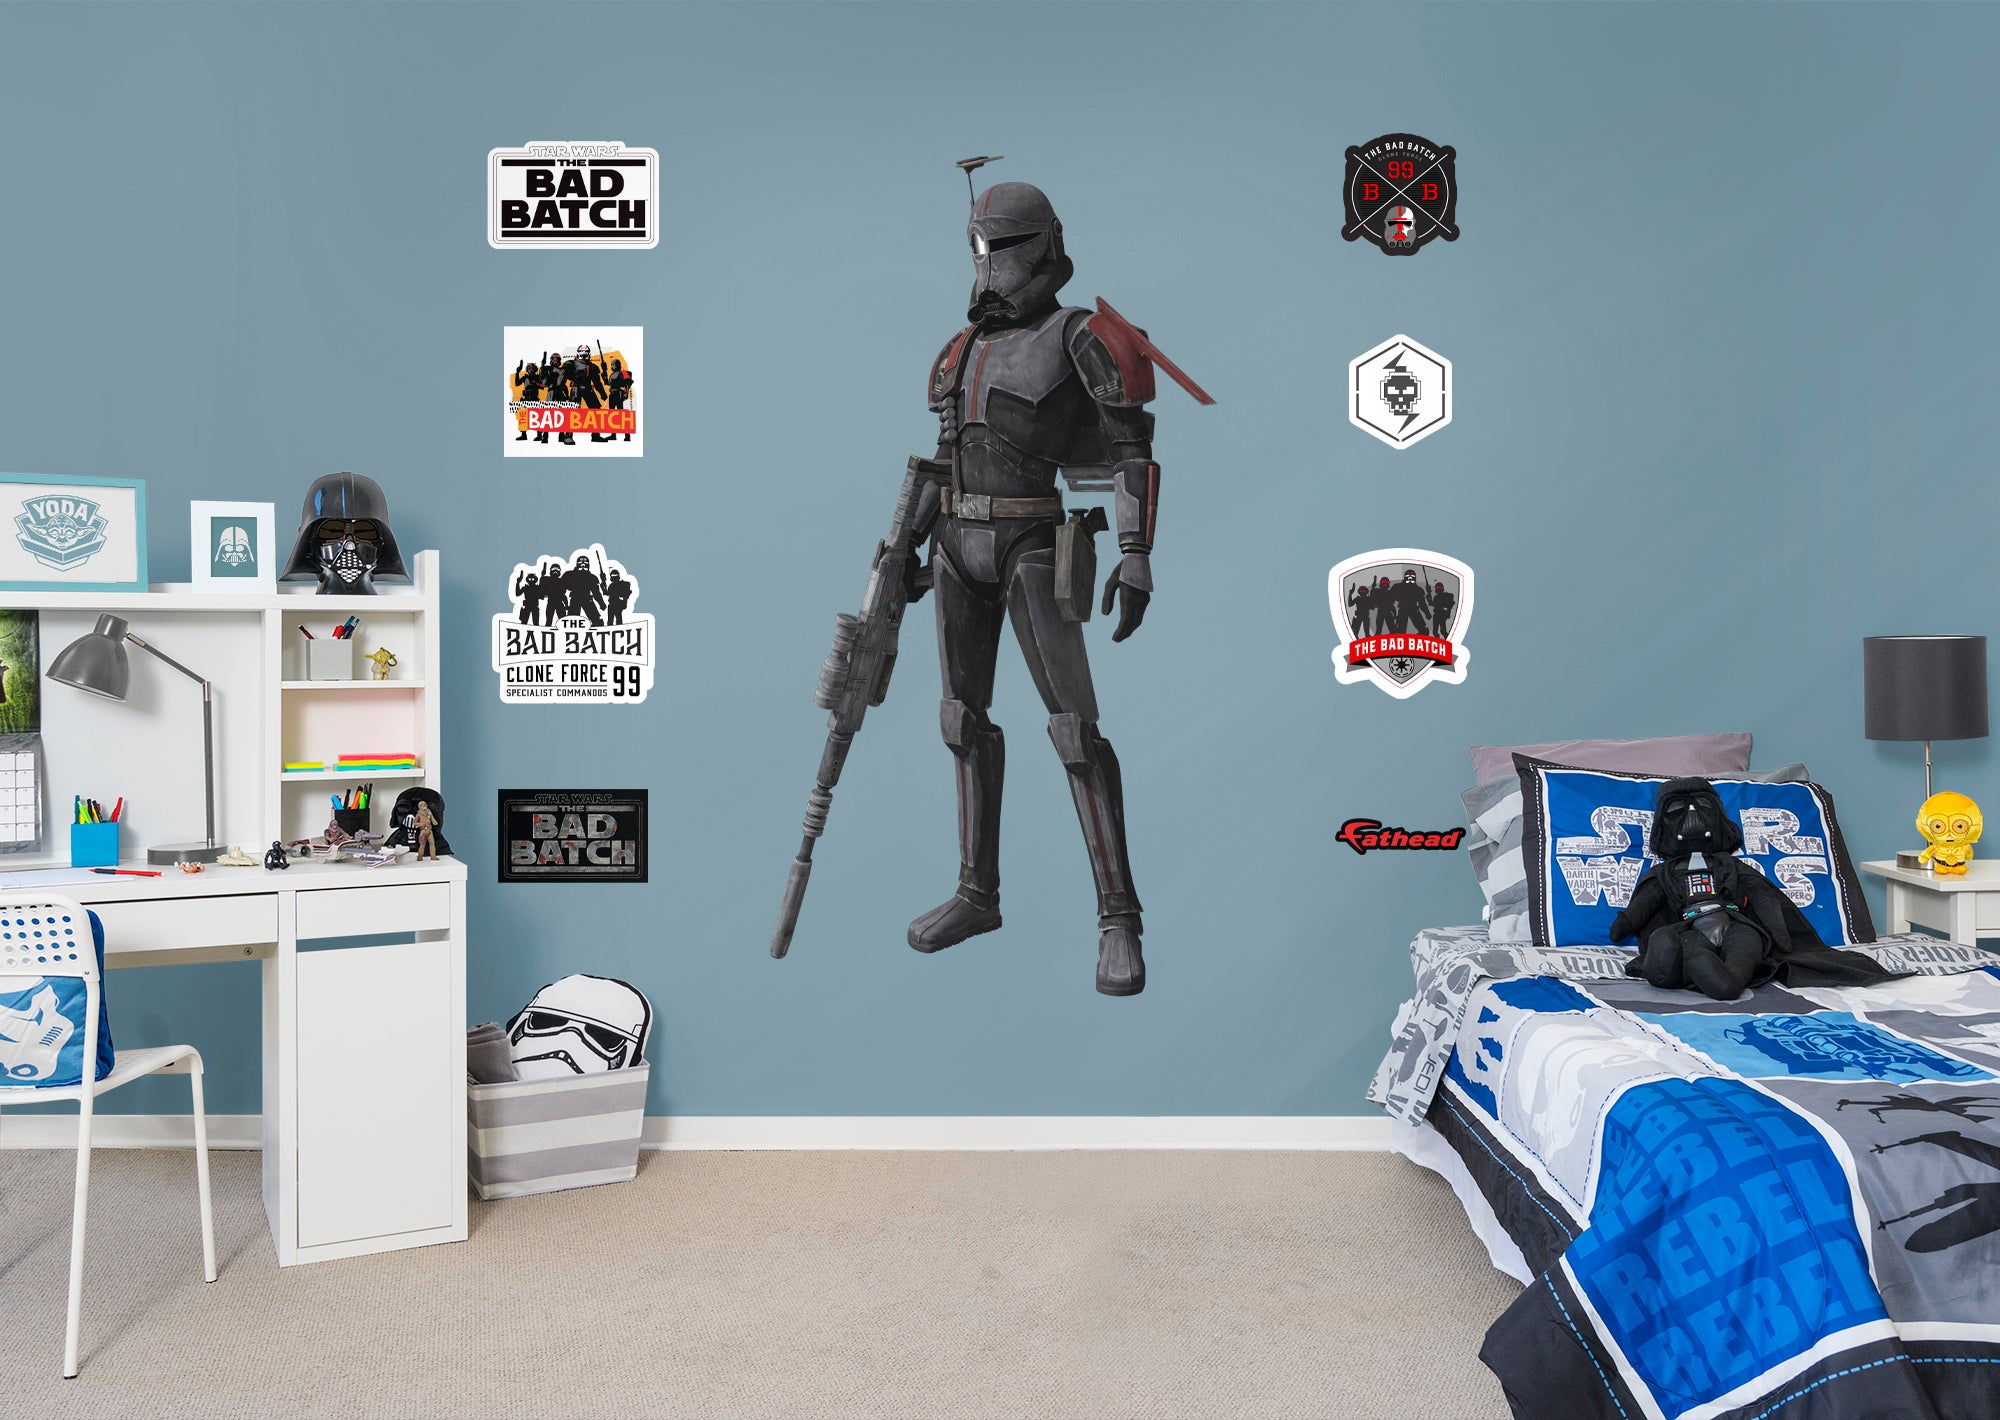 Bad Batch Crosshair - Officially Licensed Star Wars Removable Wall Decal Life-Size Character + 8 Decals by Fathead | Vinyl